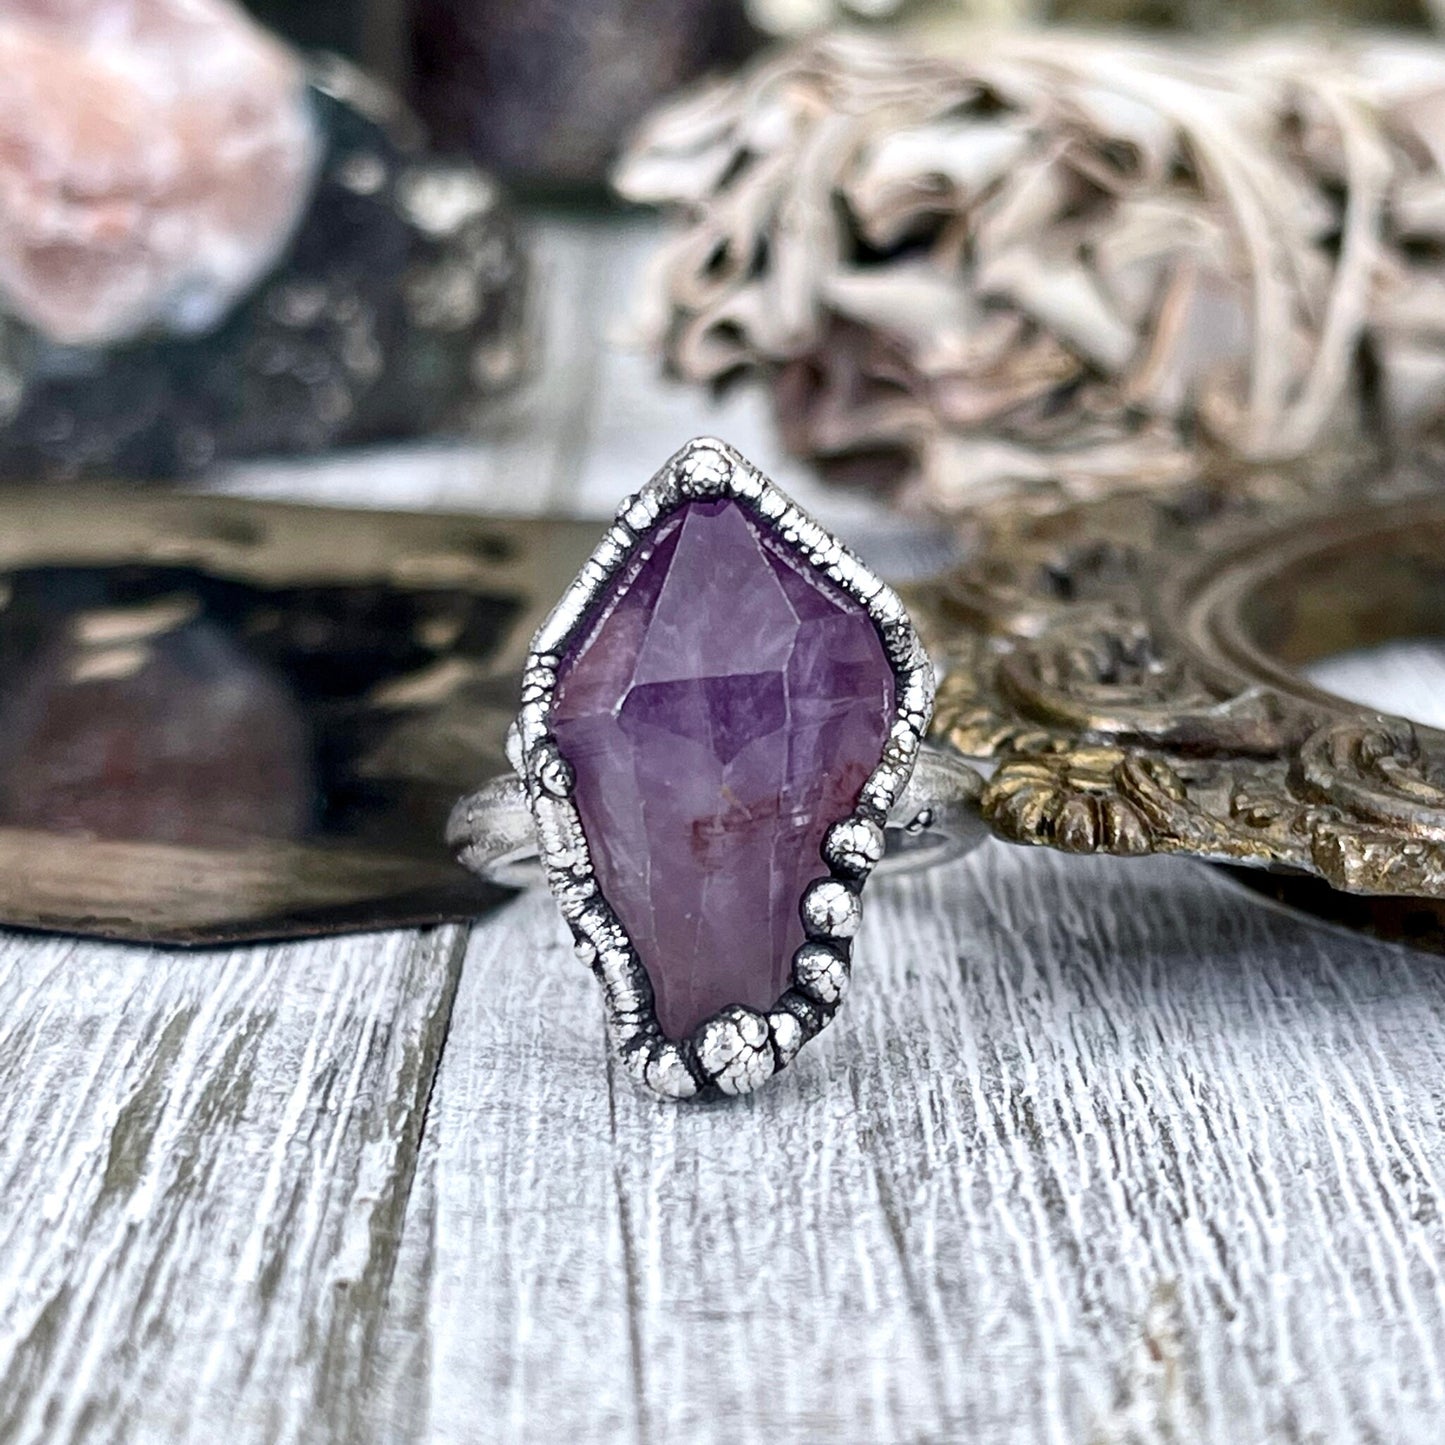 Raw Amethyst Purple Crystal Ring in Fine Silver Size 5 6 7 8 9 / Foxlark Collection - One of a Kind